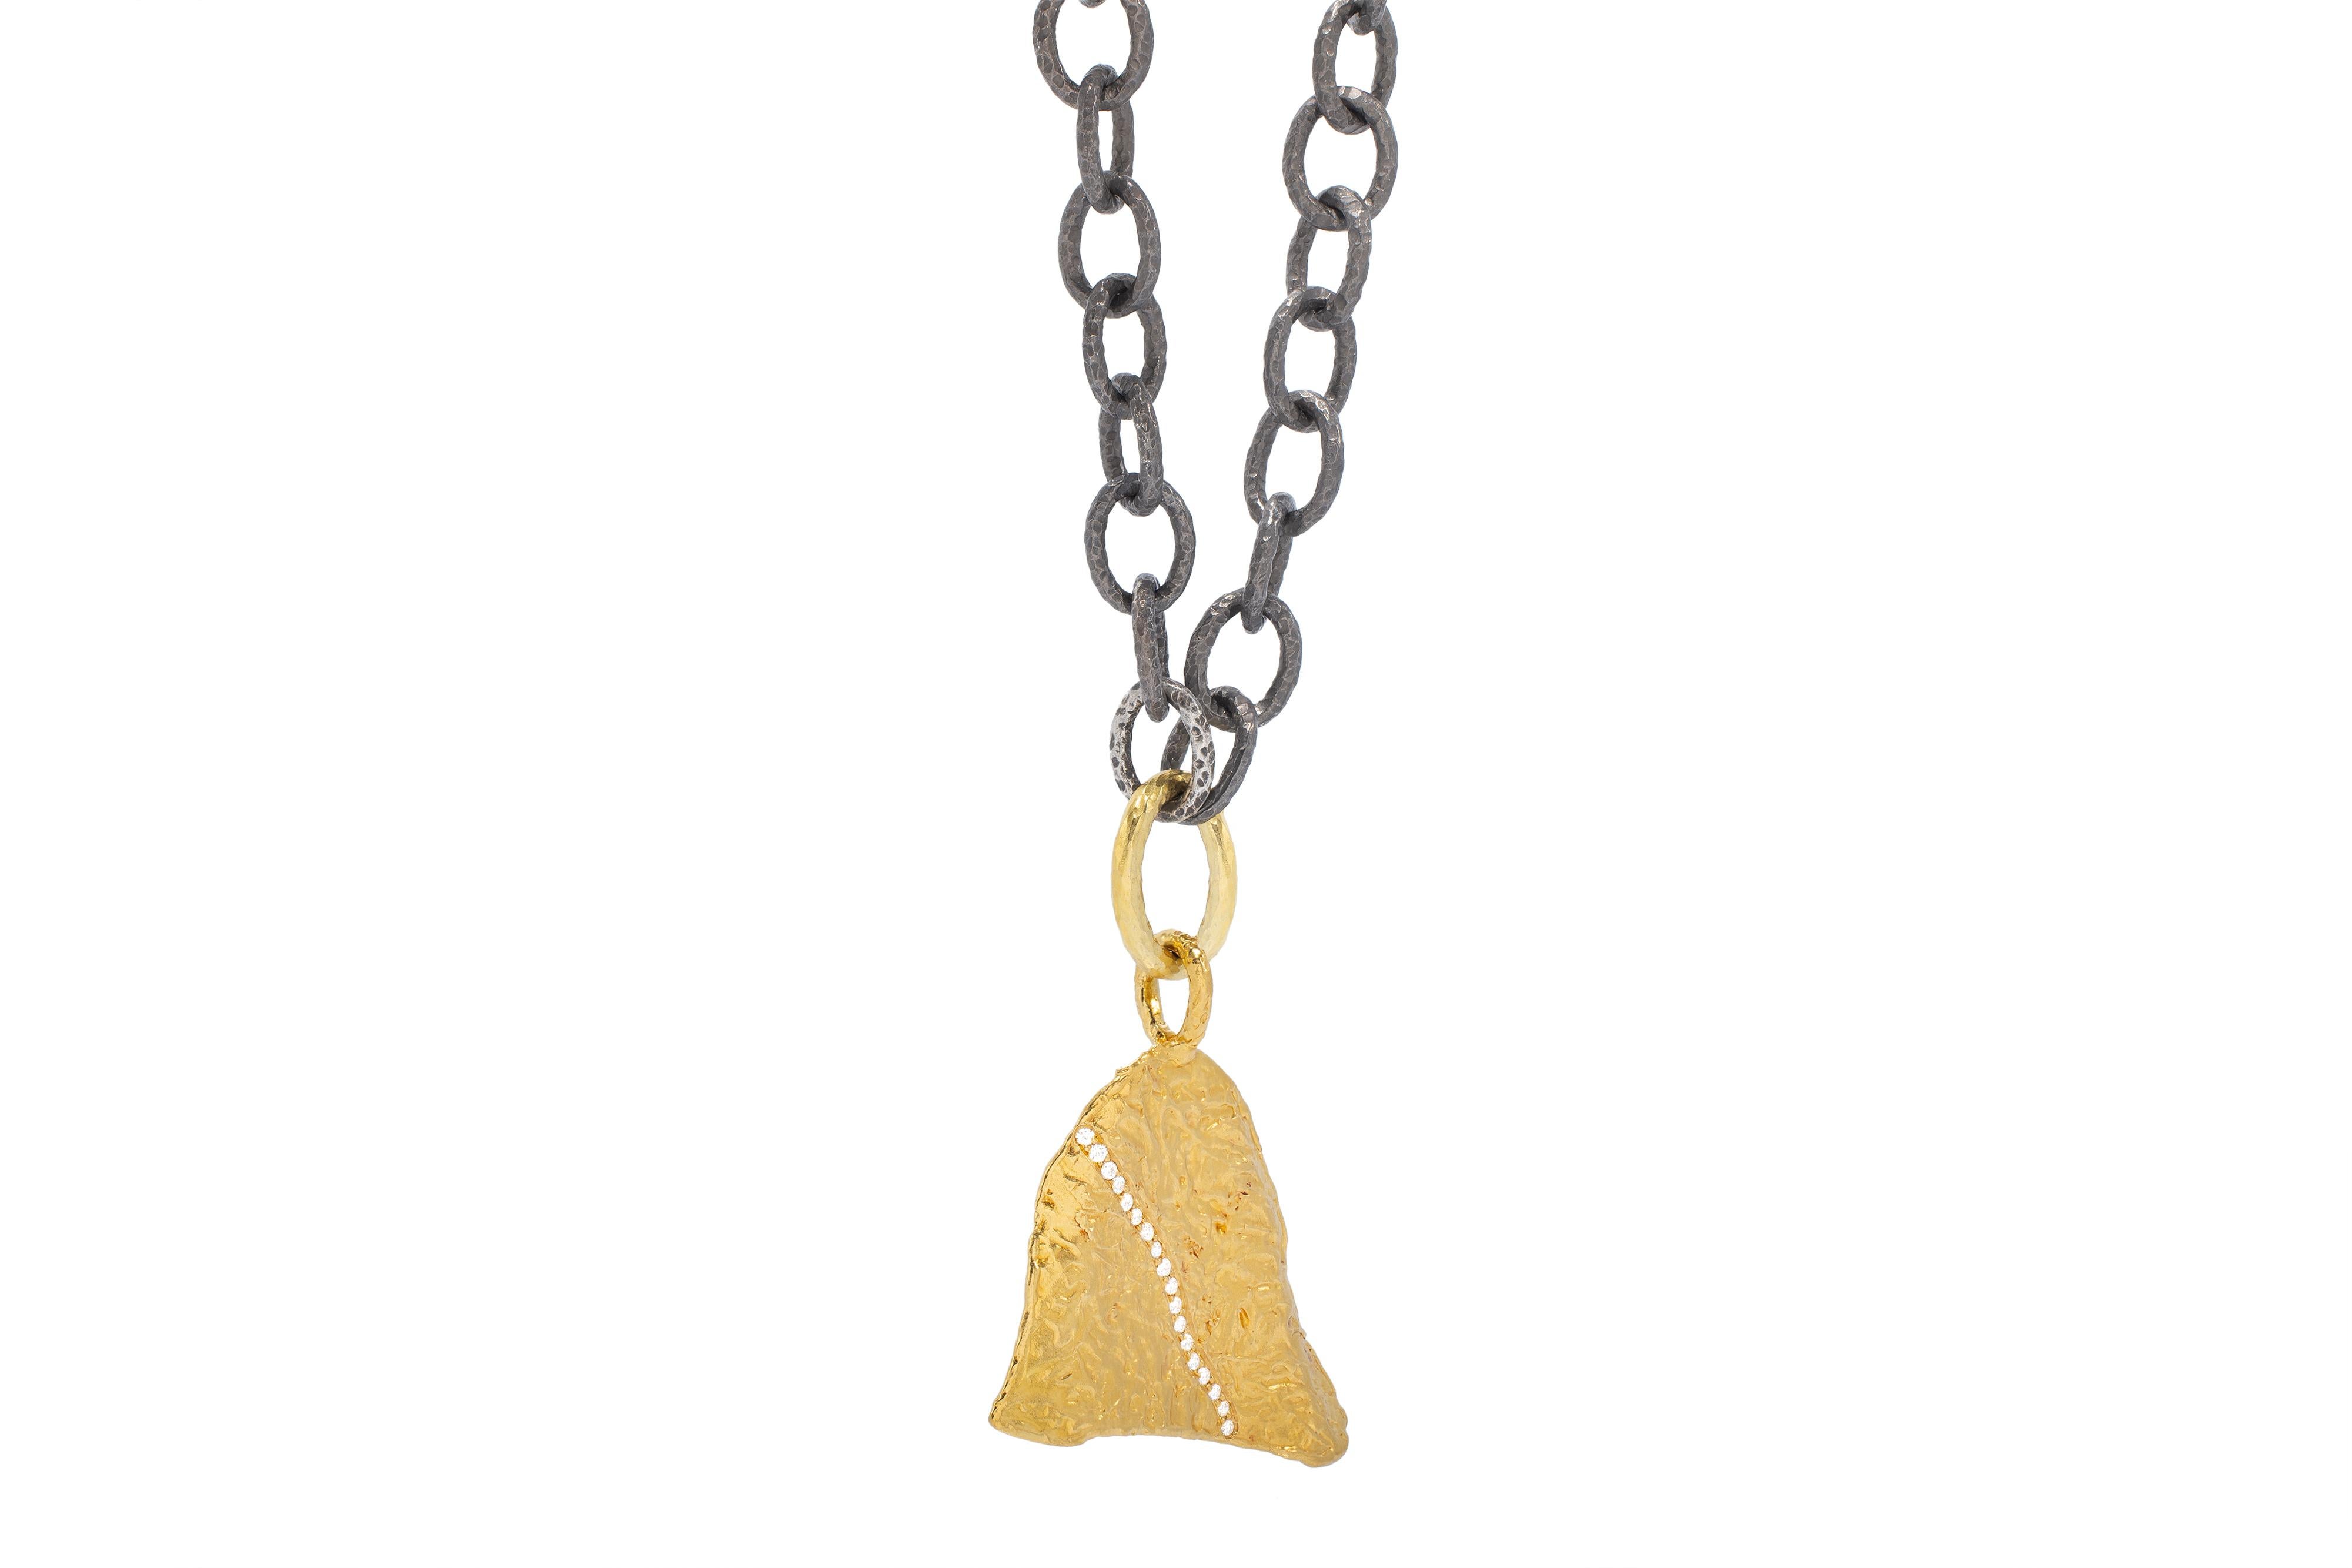 Brilliant Cut The Kim Pendant with Diamonds in 22k Gold by Tagili For Sale